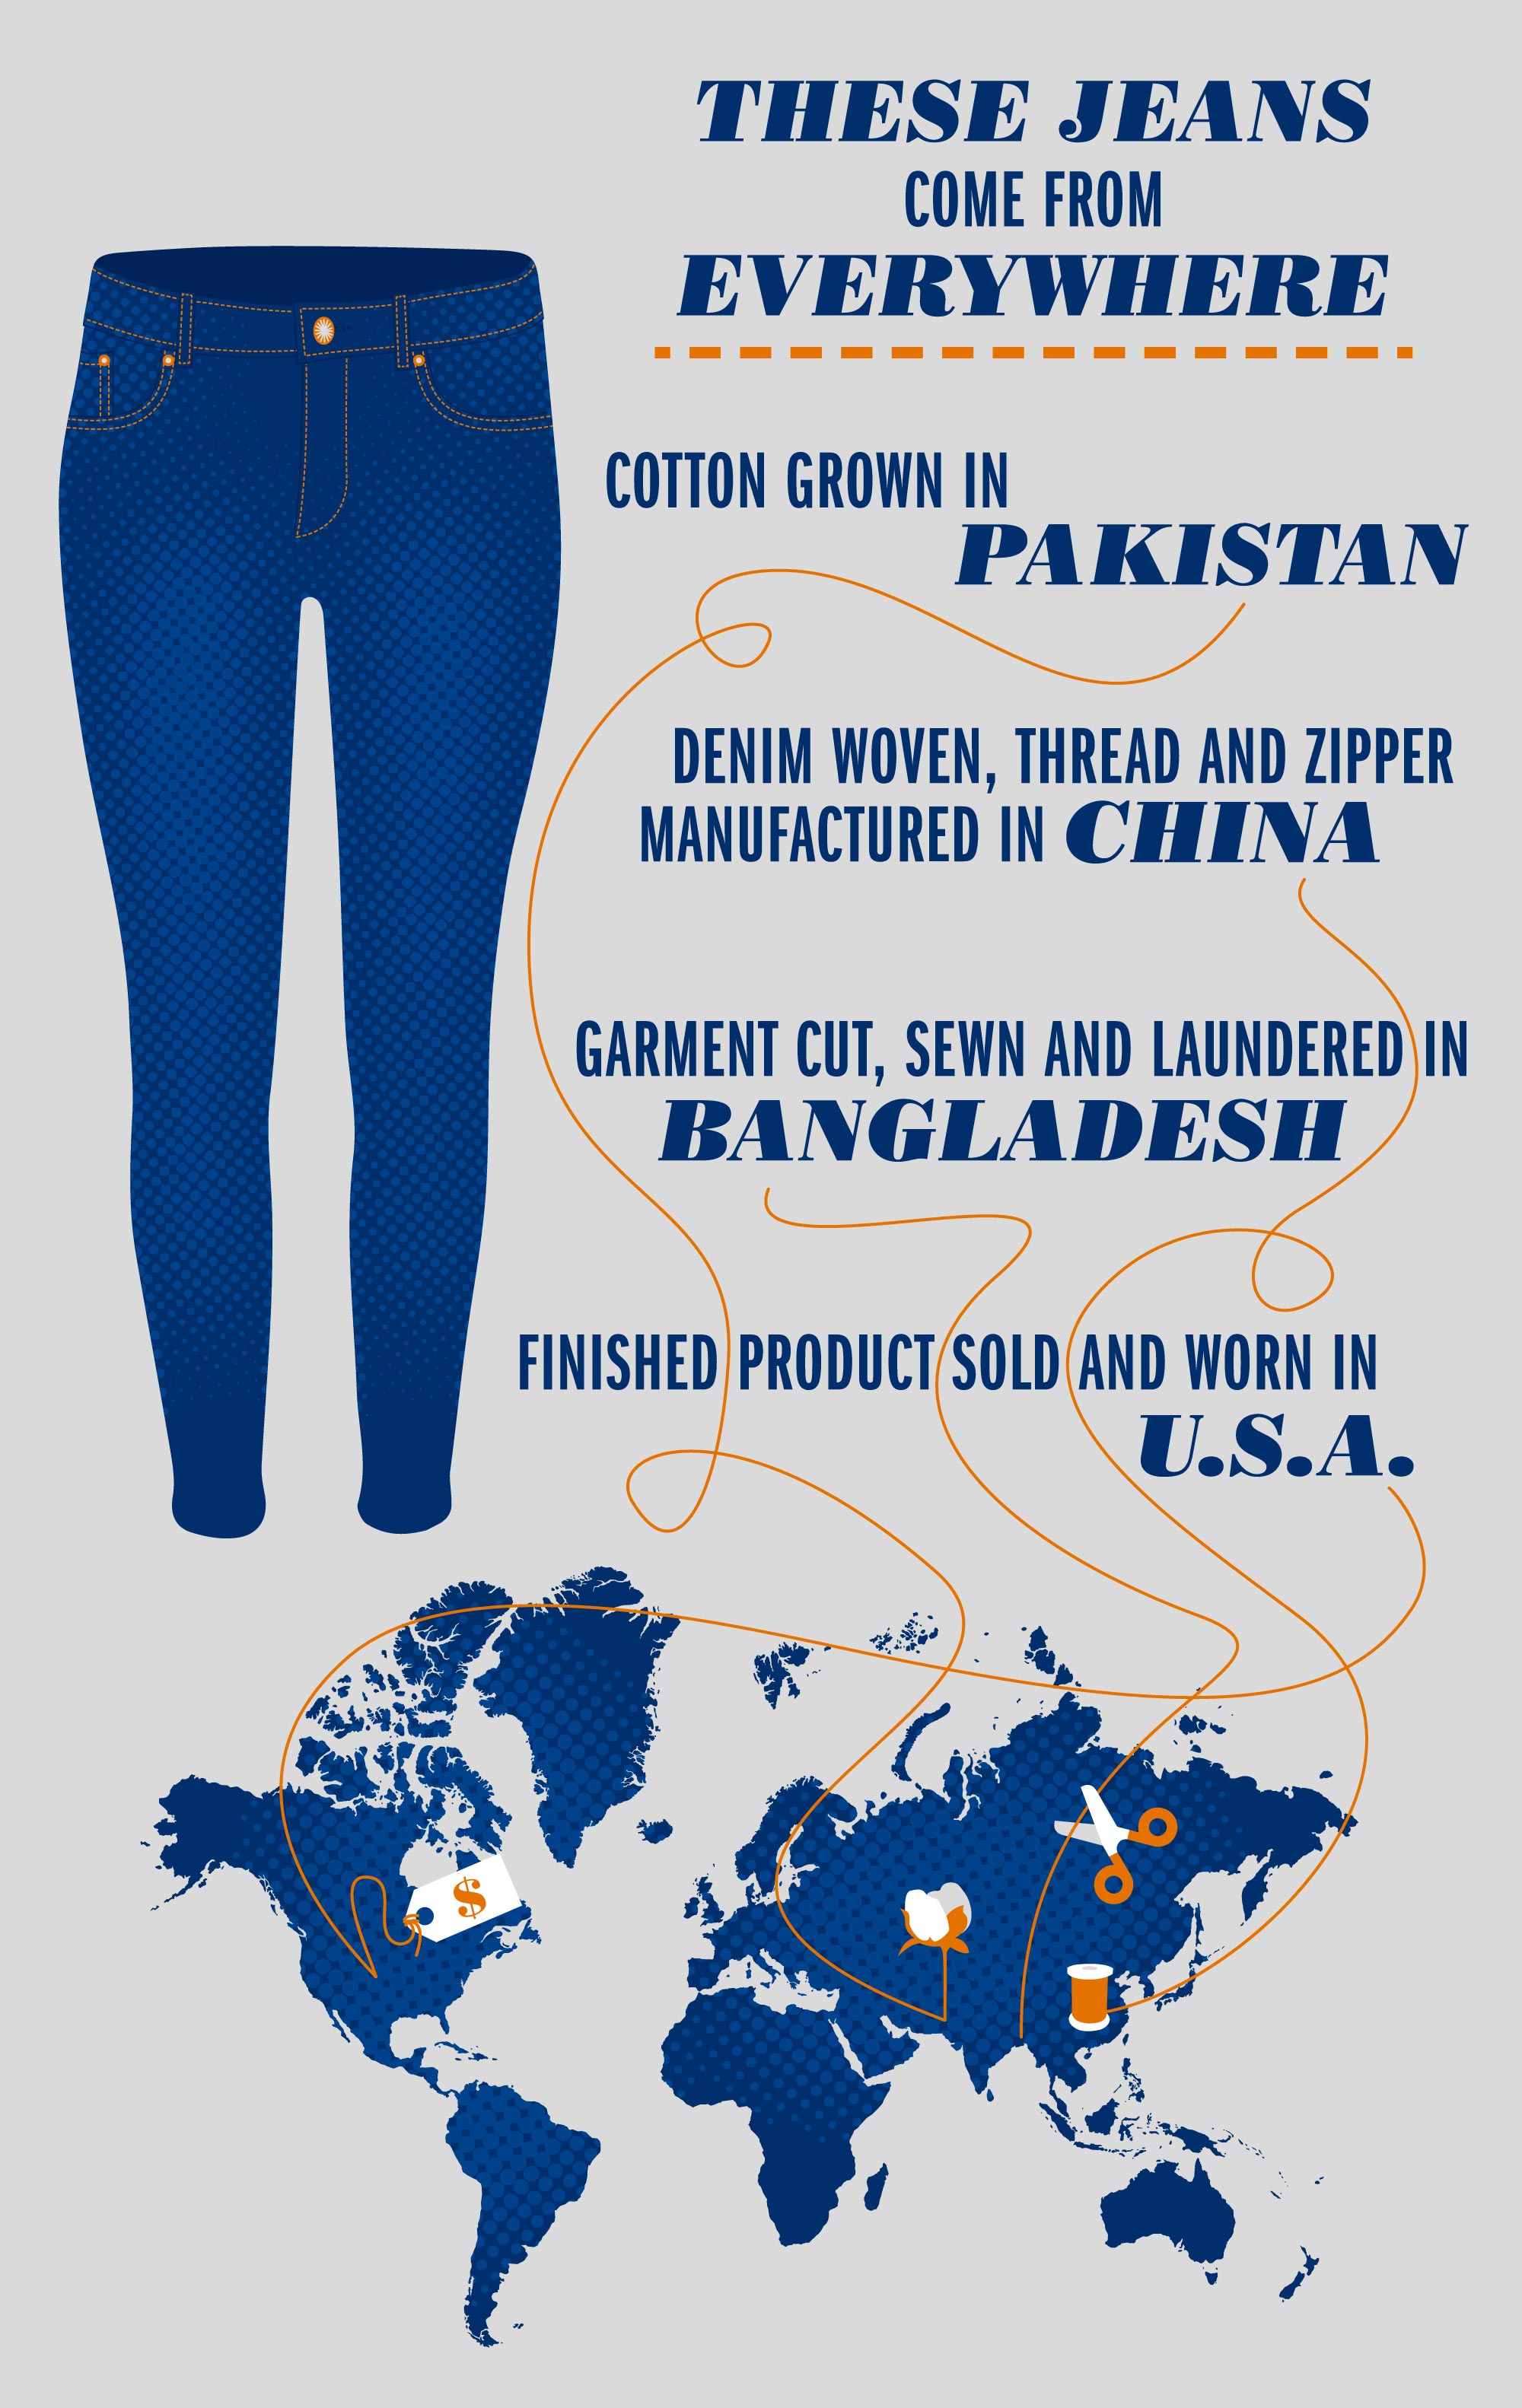 Text reads: Denim woven, thread and zipper manufactured in China.  Garment cut, sewn and laundered in Bangladesh.  Finished product sold and worn in U.S.A.